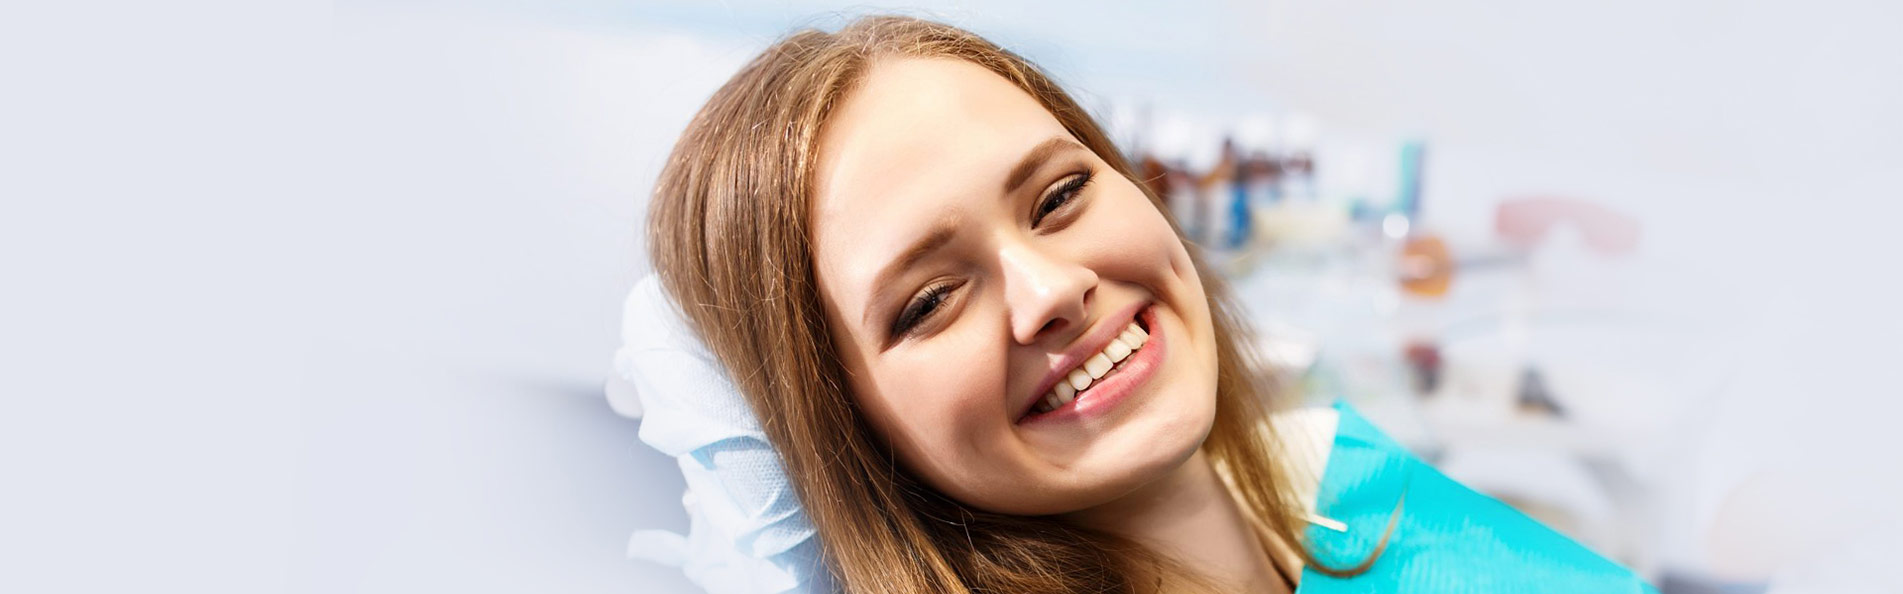 Is Tooth Extraction the Best Option?